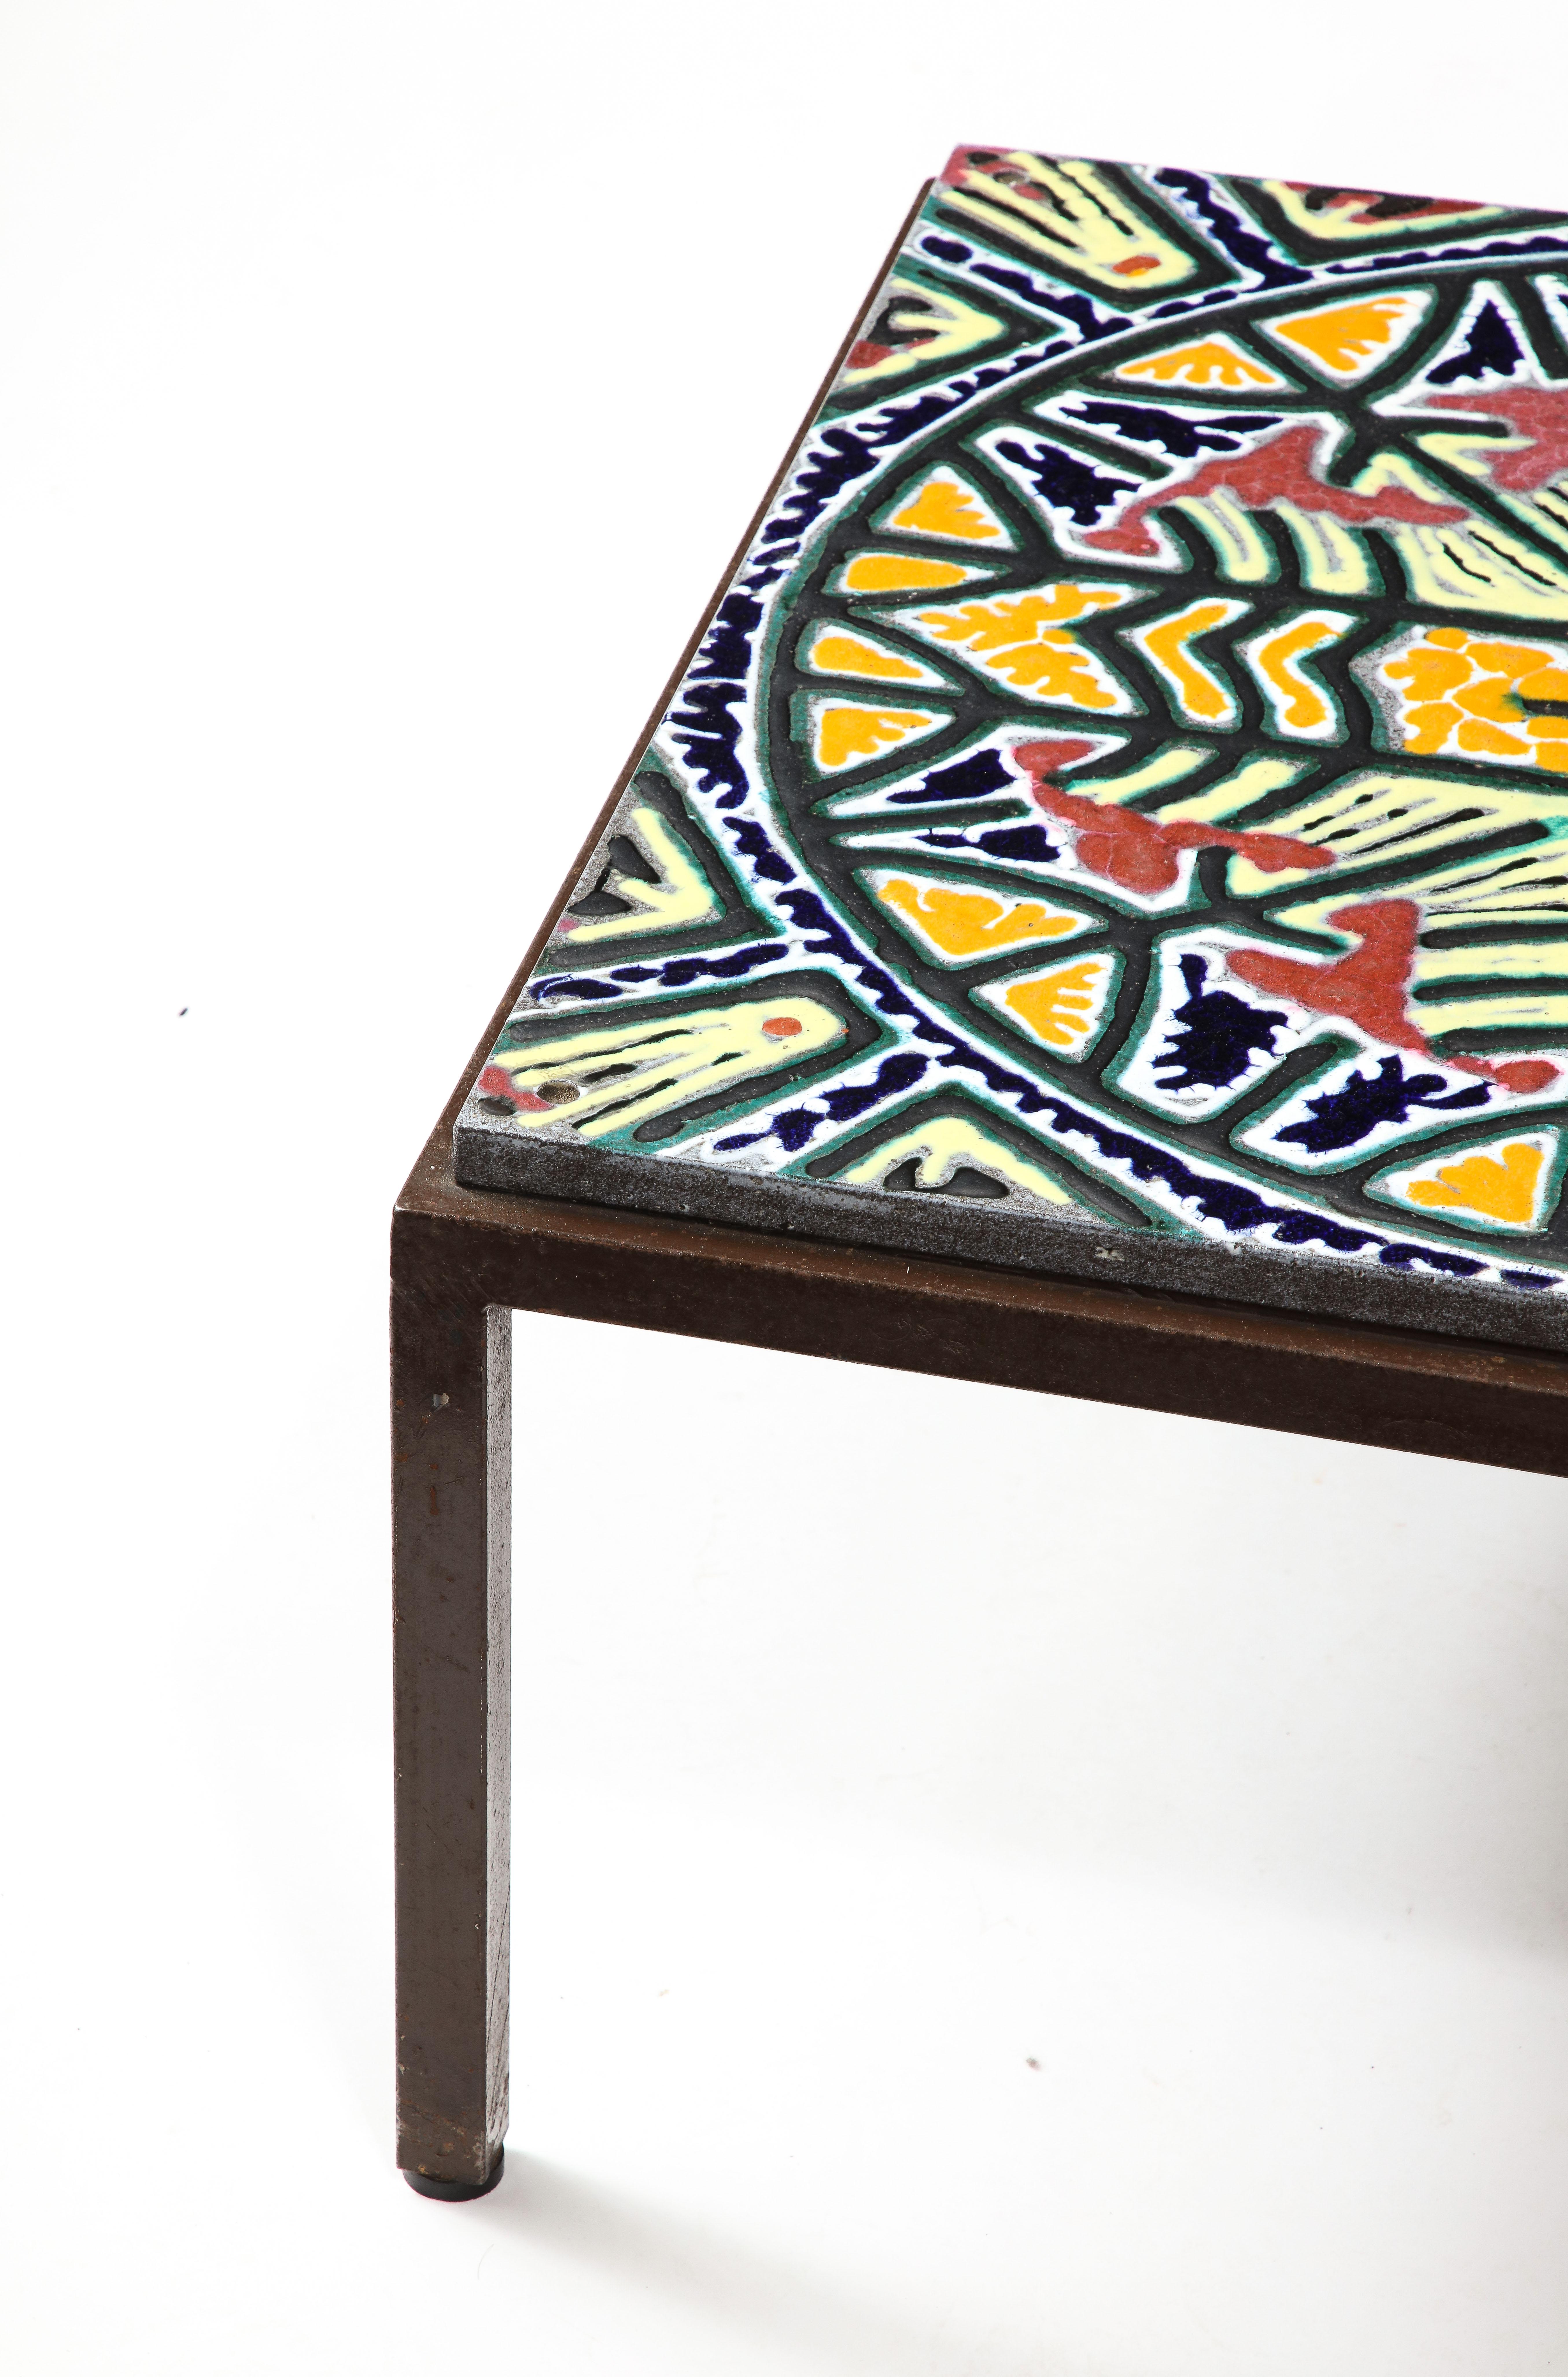 Rare coffee table by the ceramist of Guillerme & Chambon, Boleslaw Danikowski. Made of a slab of natural lava stone enameled in various colors and patterns then kiln fired.